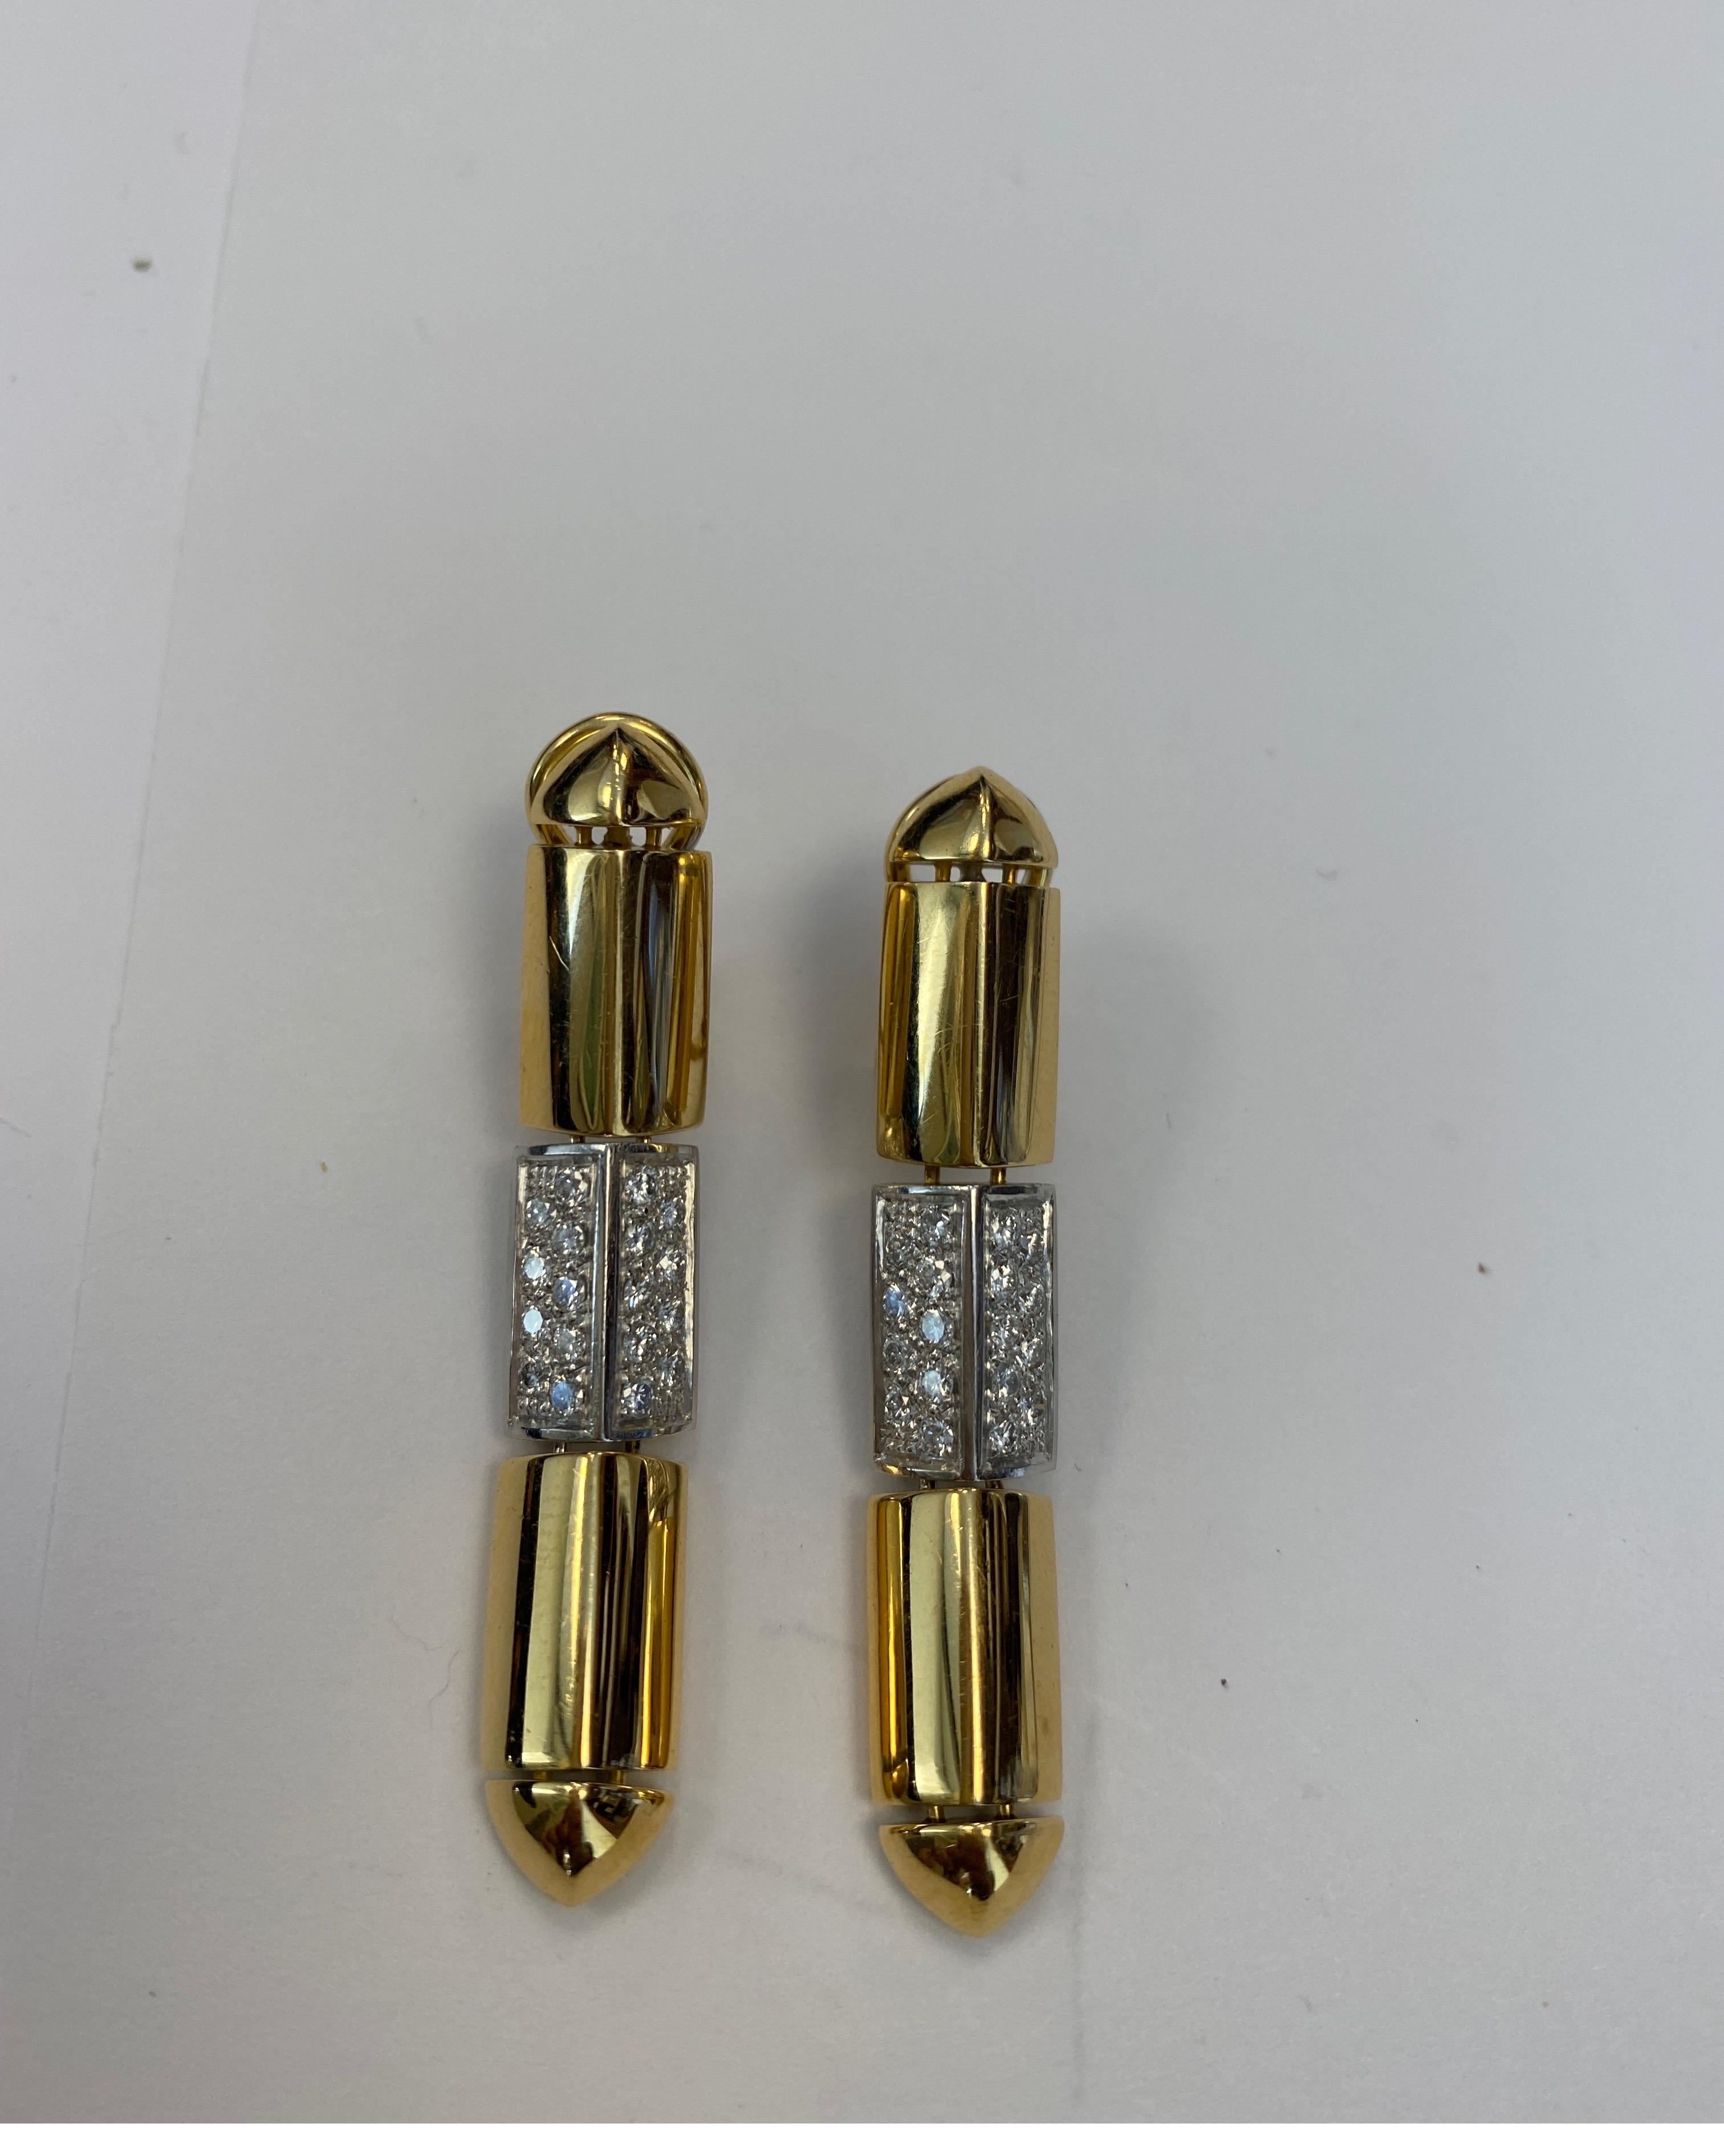 18K yellow gold and platinum flexible drop earrings, by Antonini with 36 full cut round diamonds .79cts set in platinum
Retail $5250